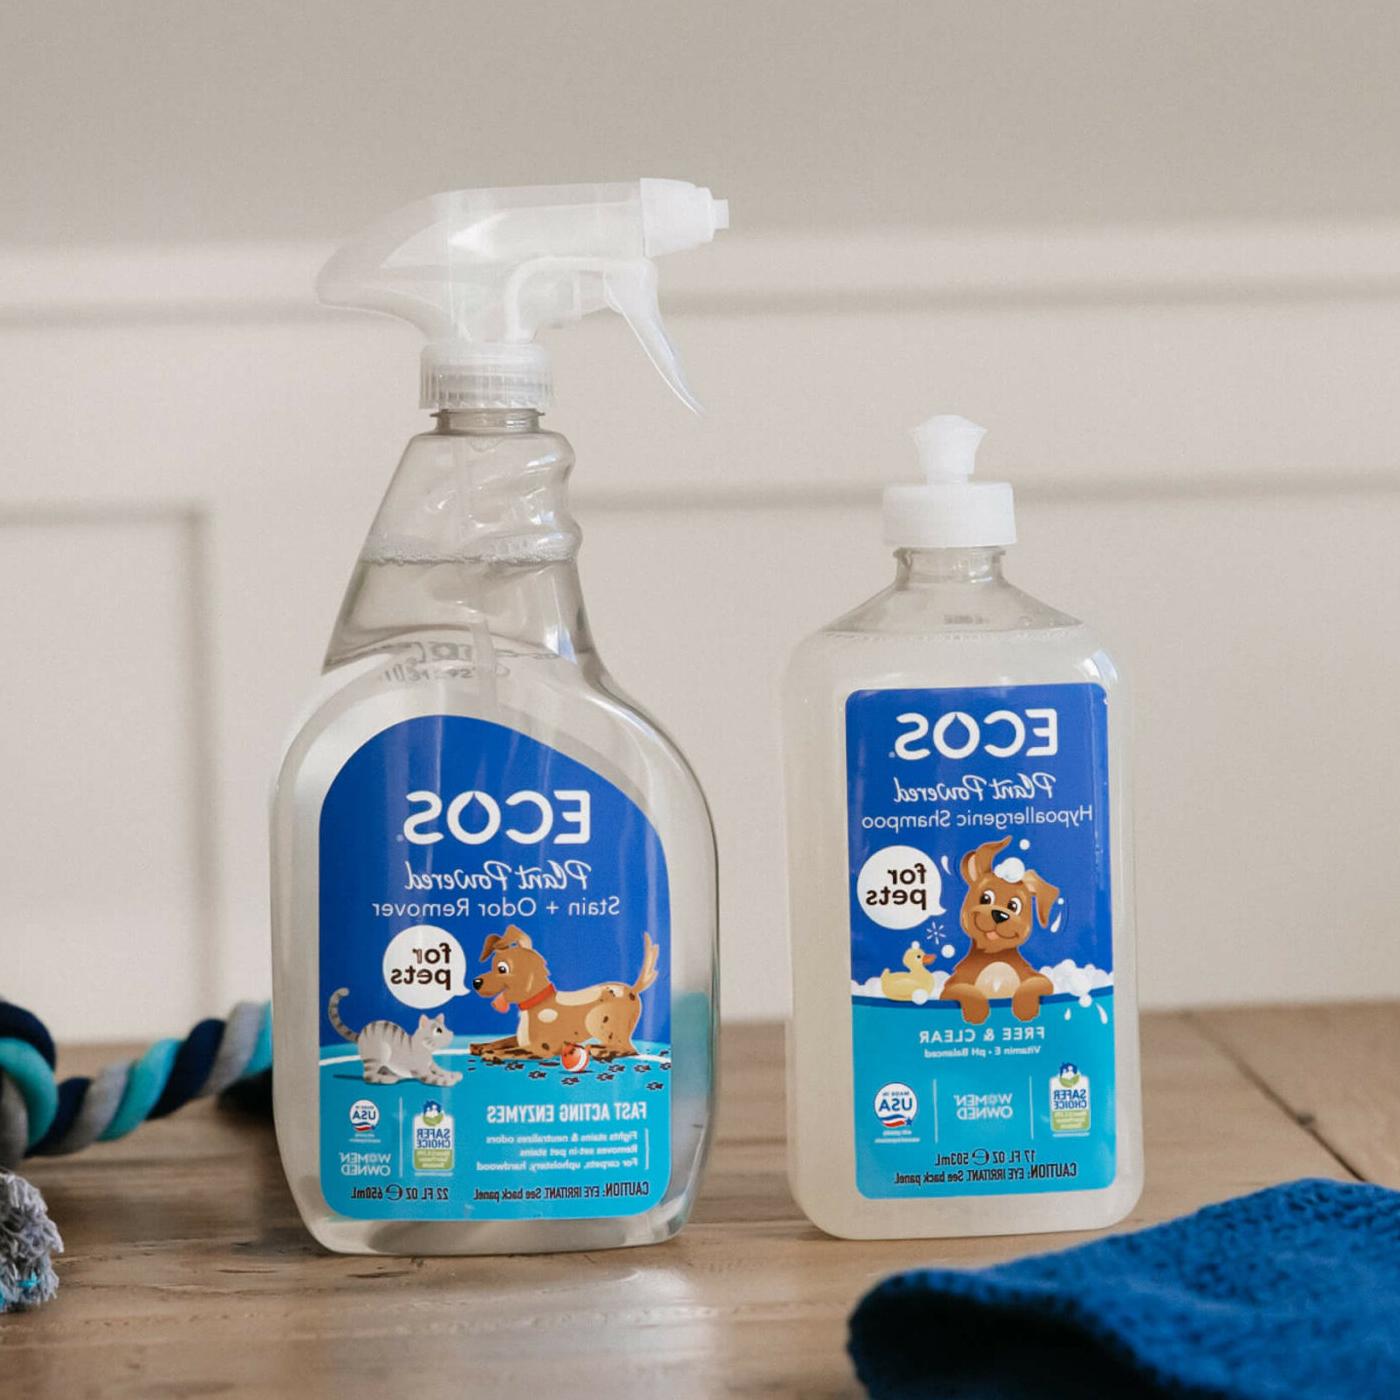 ECOS pet products